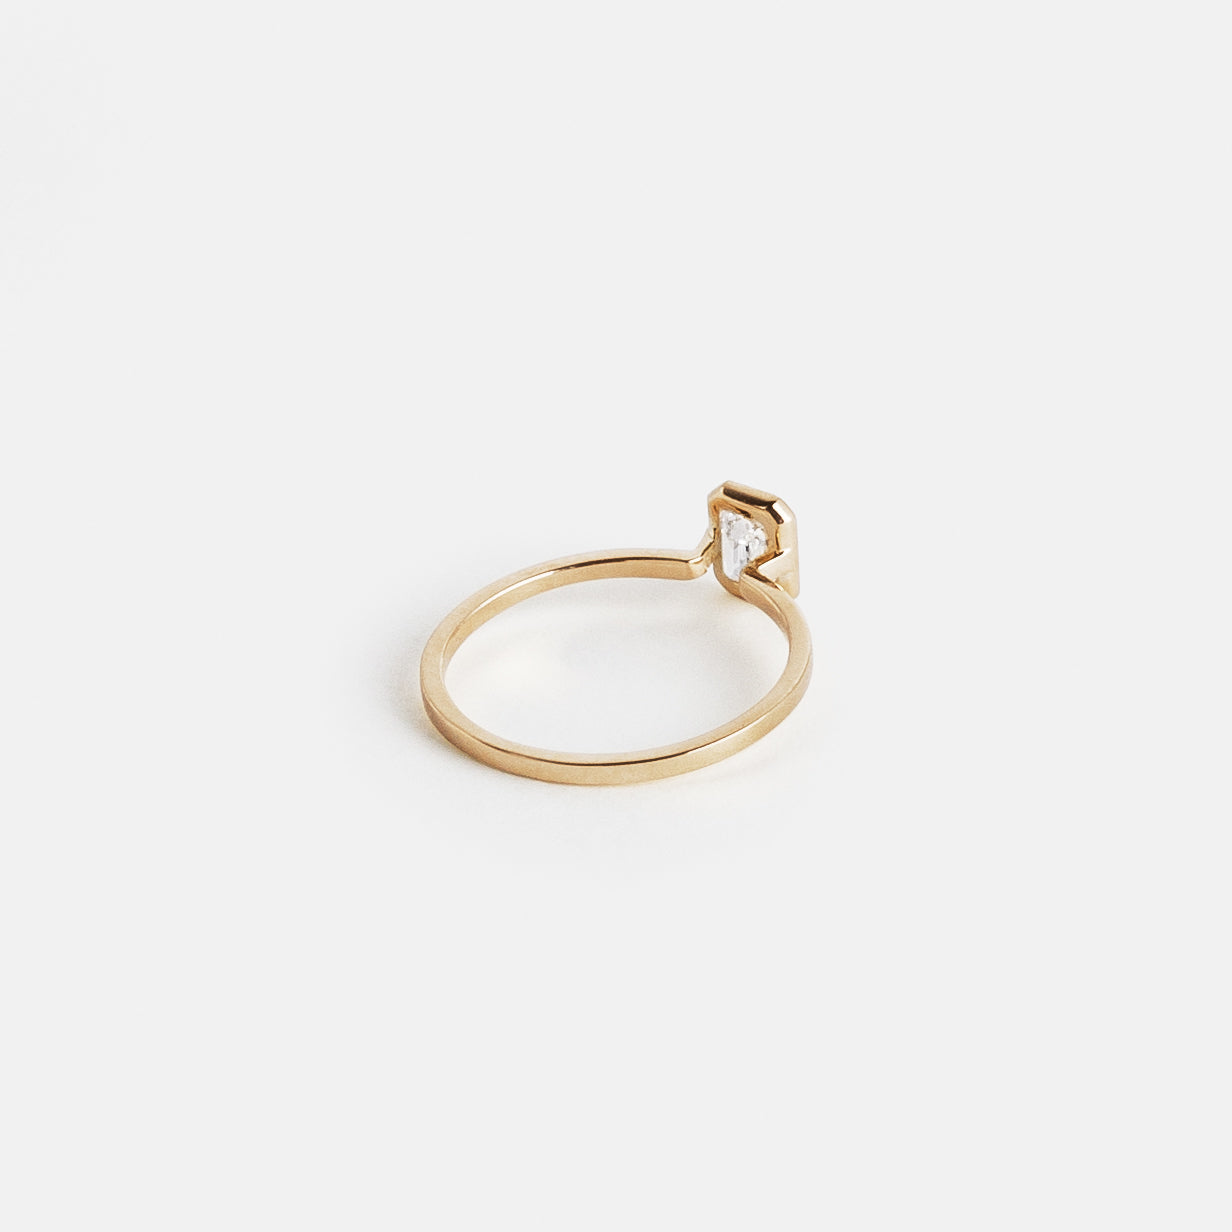 Auda Simple Ring in 14k Gold set with an emerald cut lab-grown diamond By SHW Fine Jewelry NYC